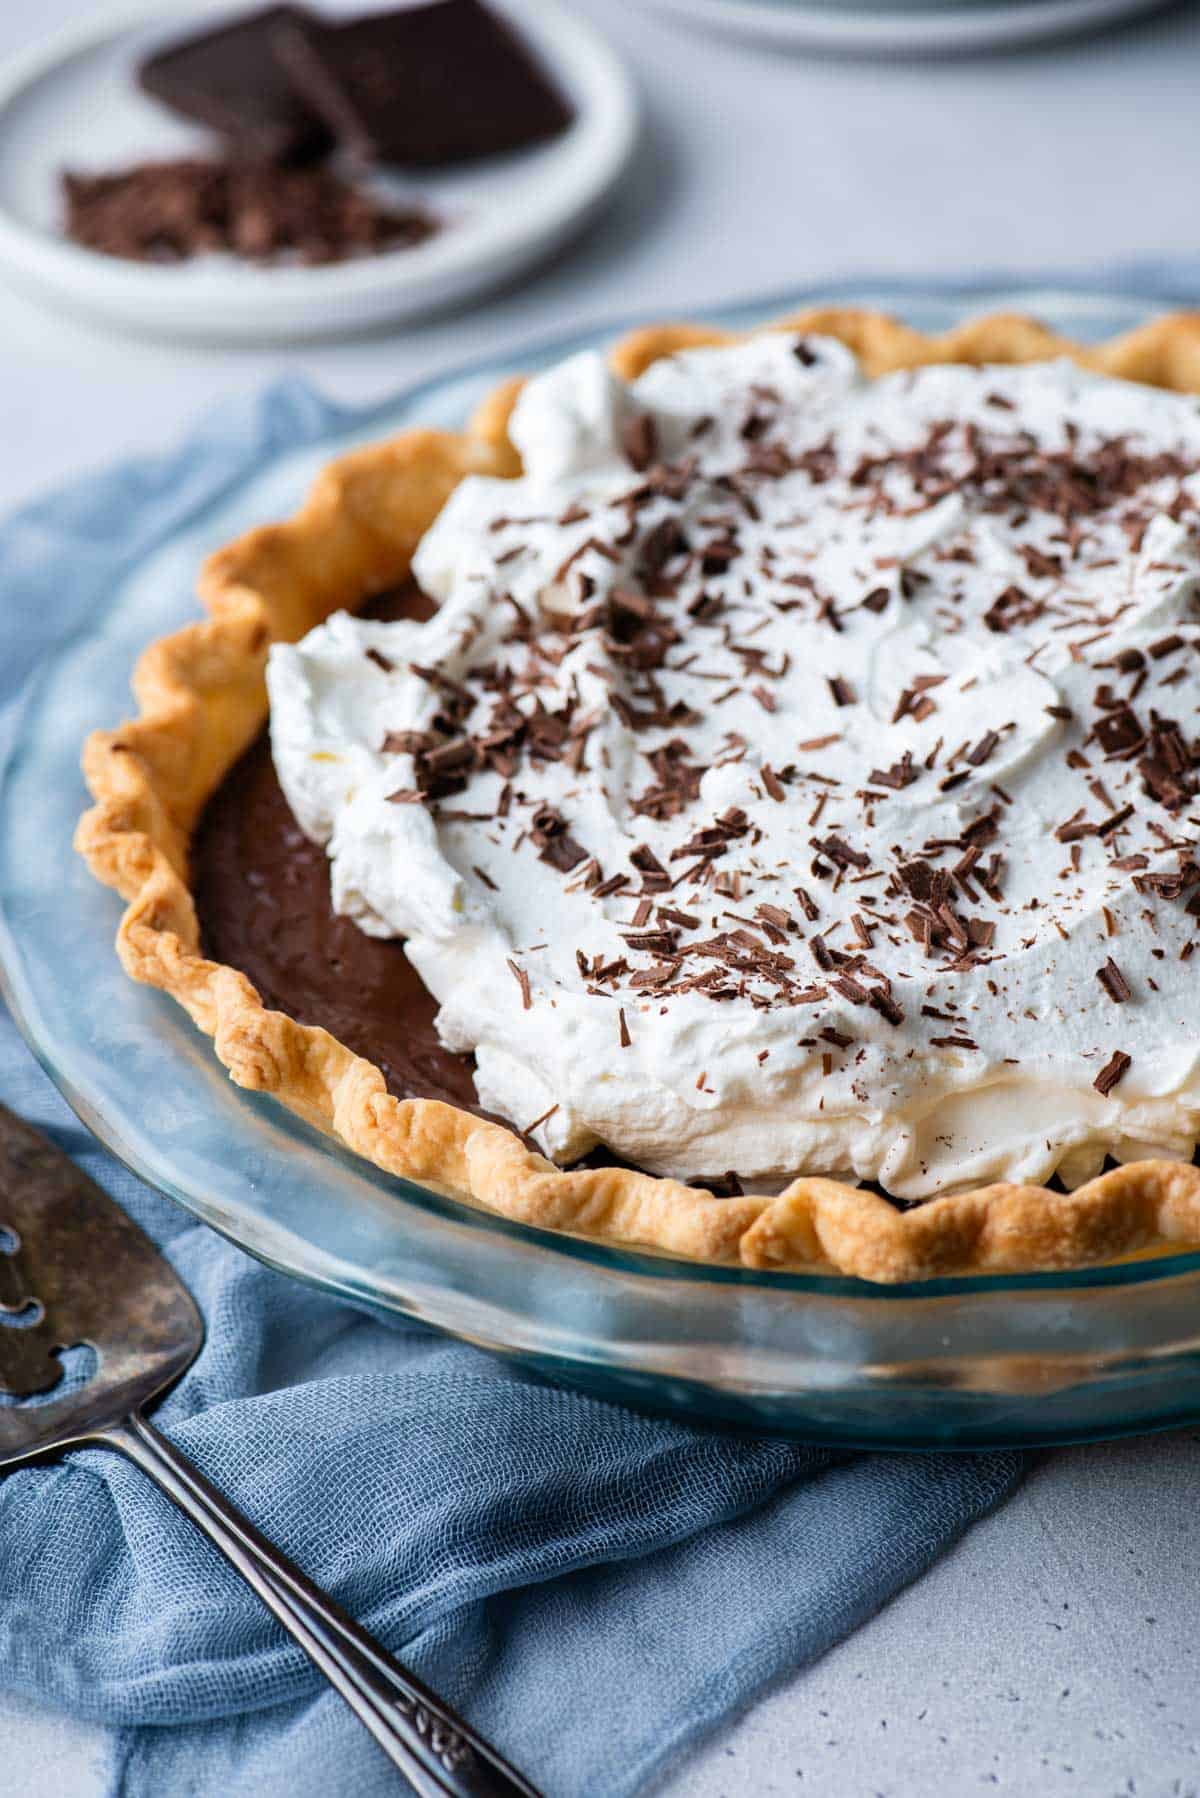 a chocolate pie in a glass pie dish sitting on a blue towel with a serving spatula beside it and a plate of chocolate in the background